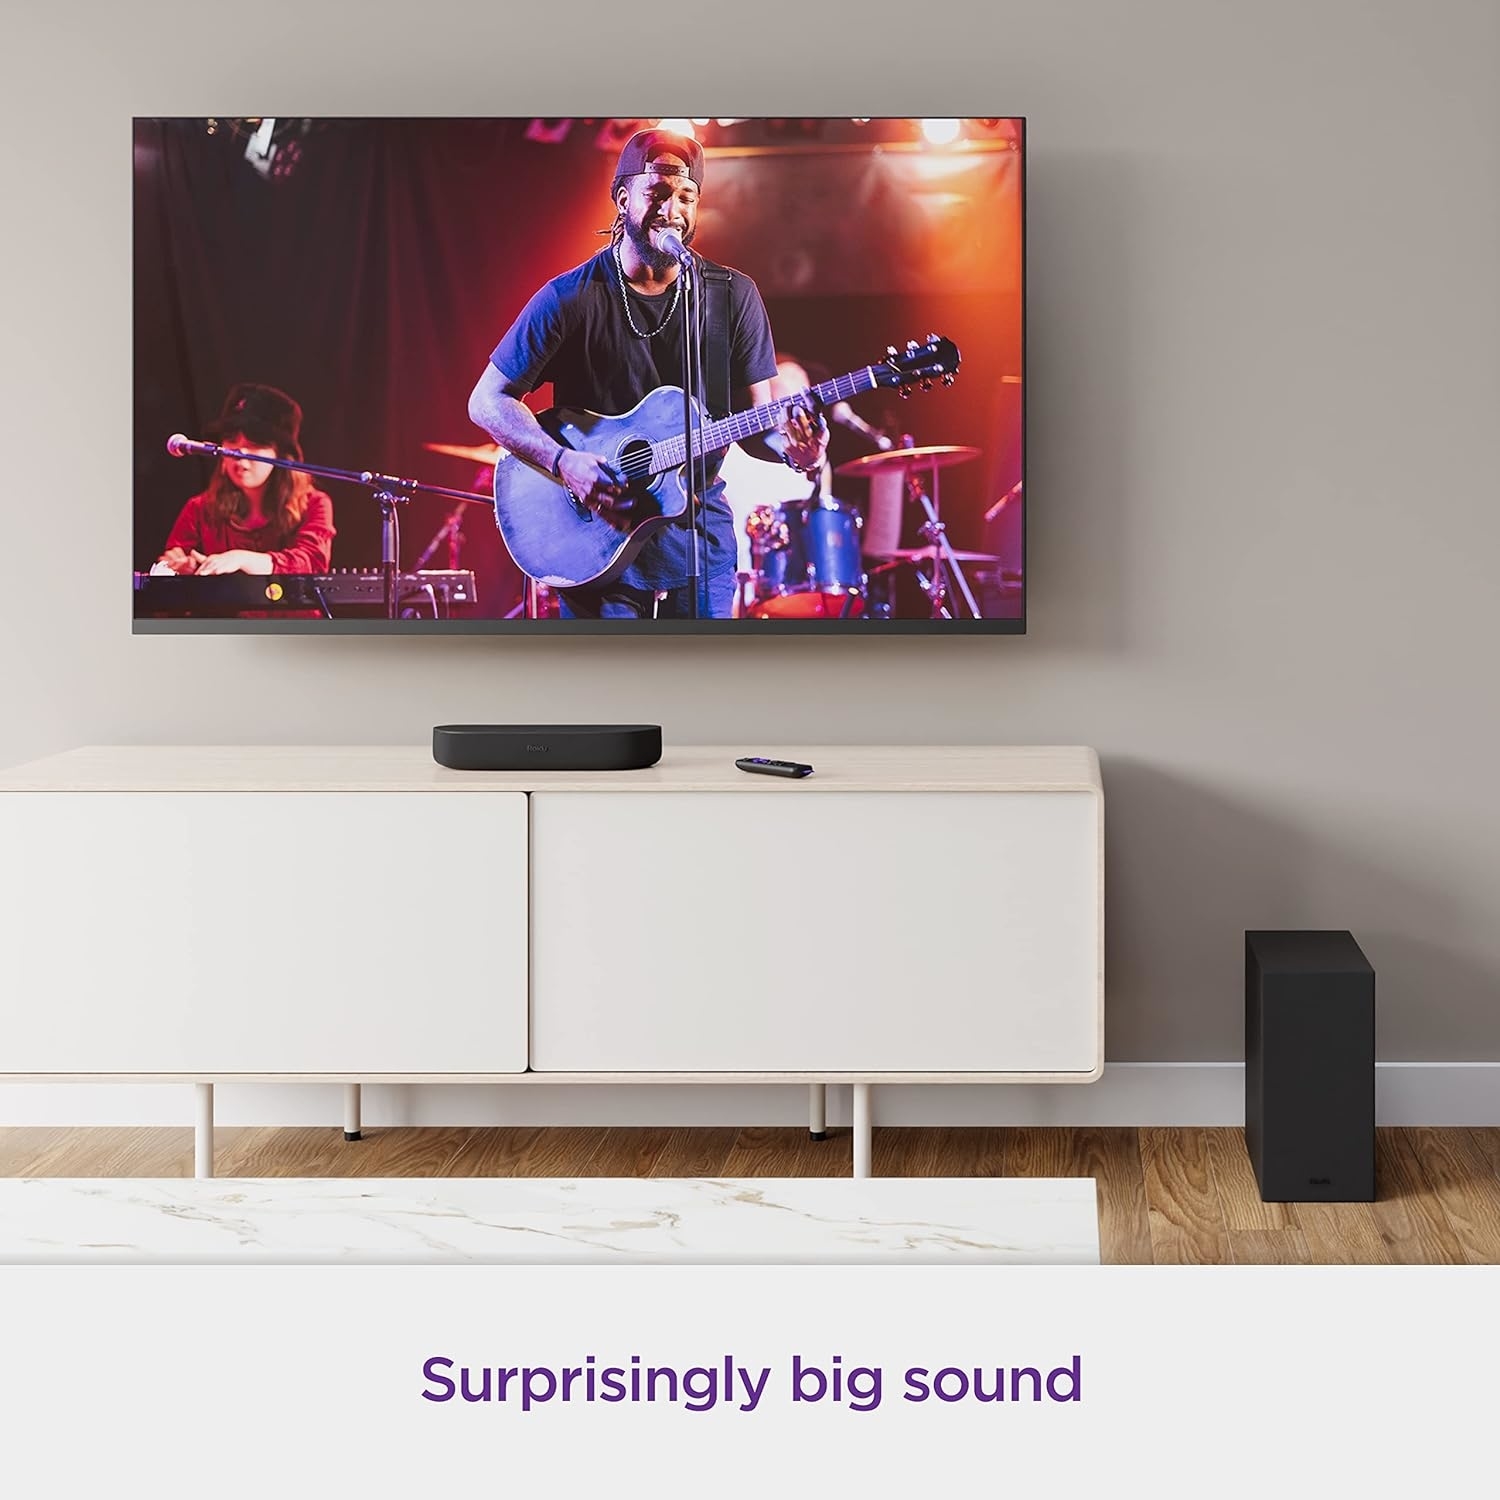 A living room with a TV showing a man playing guitar, the streambar below it, and the subwoofer bass speaker to the side with text &quot;Surprisingly big sound&quot;